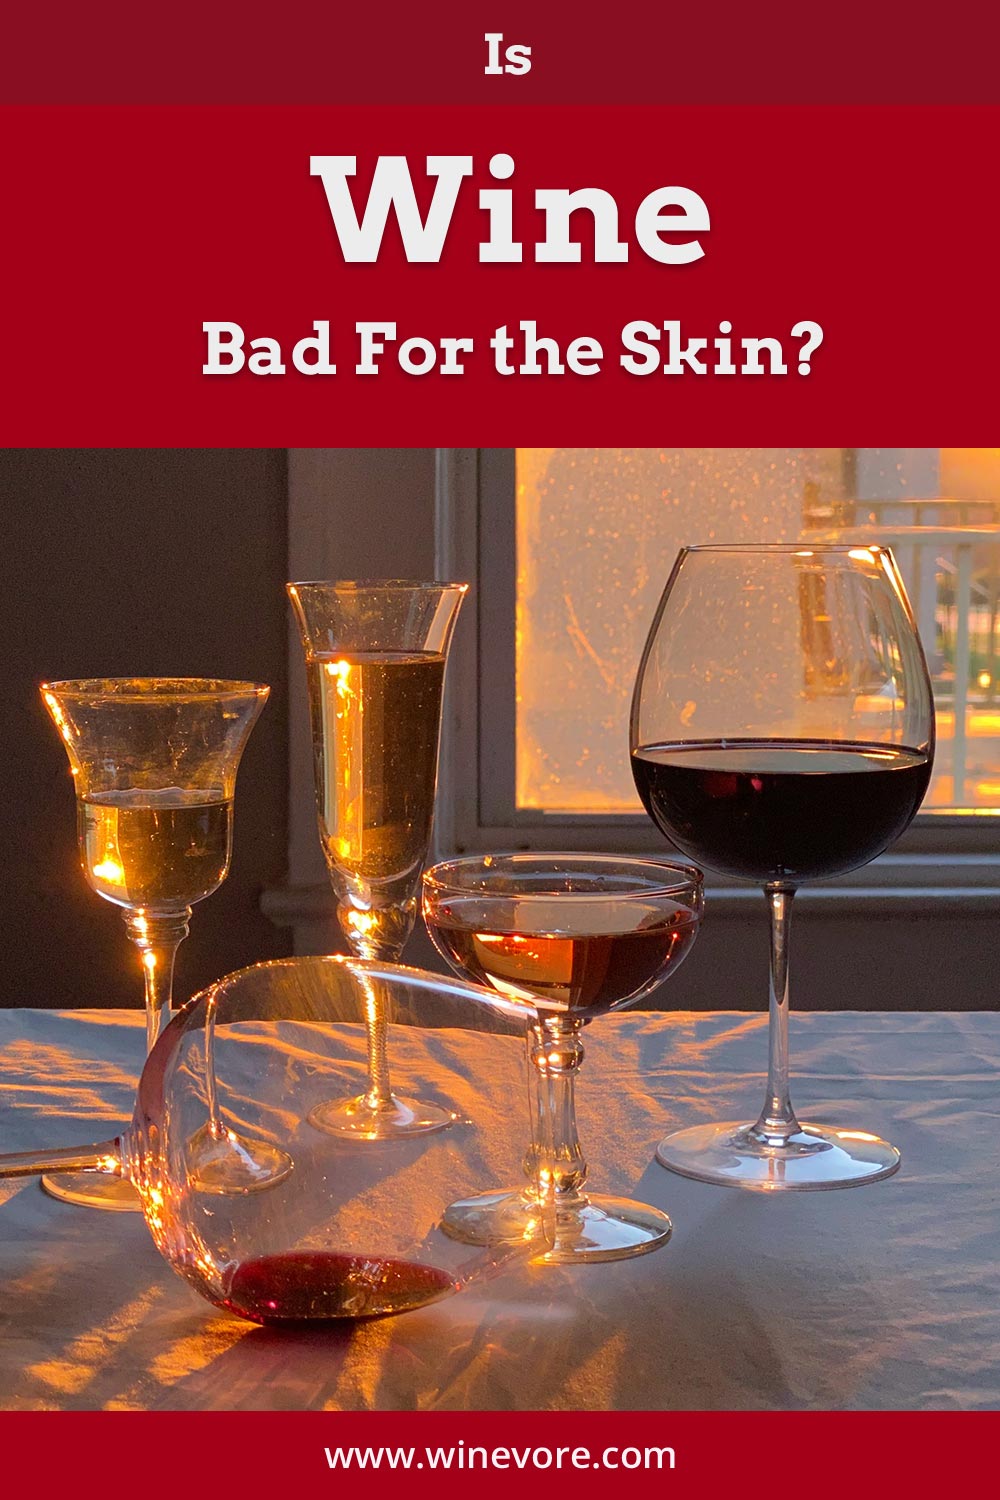 Different kinds of wines in glasses on a table - are they bad for the skin?